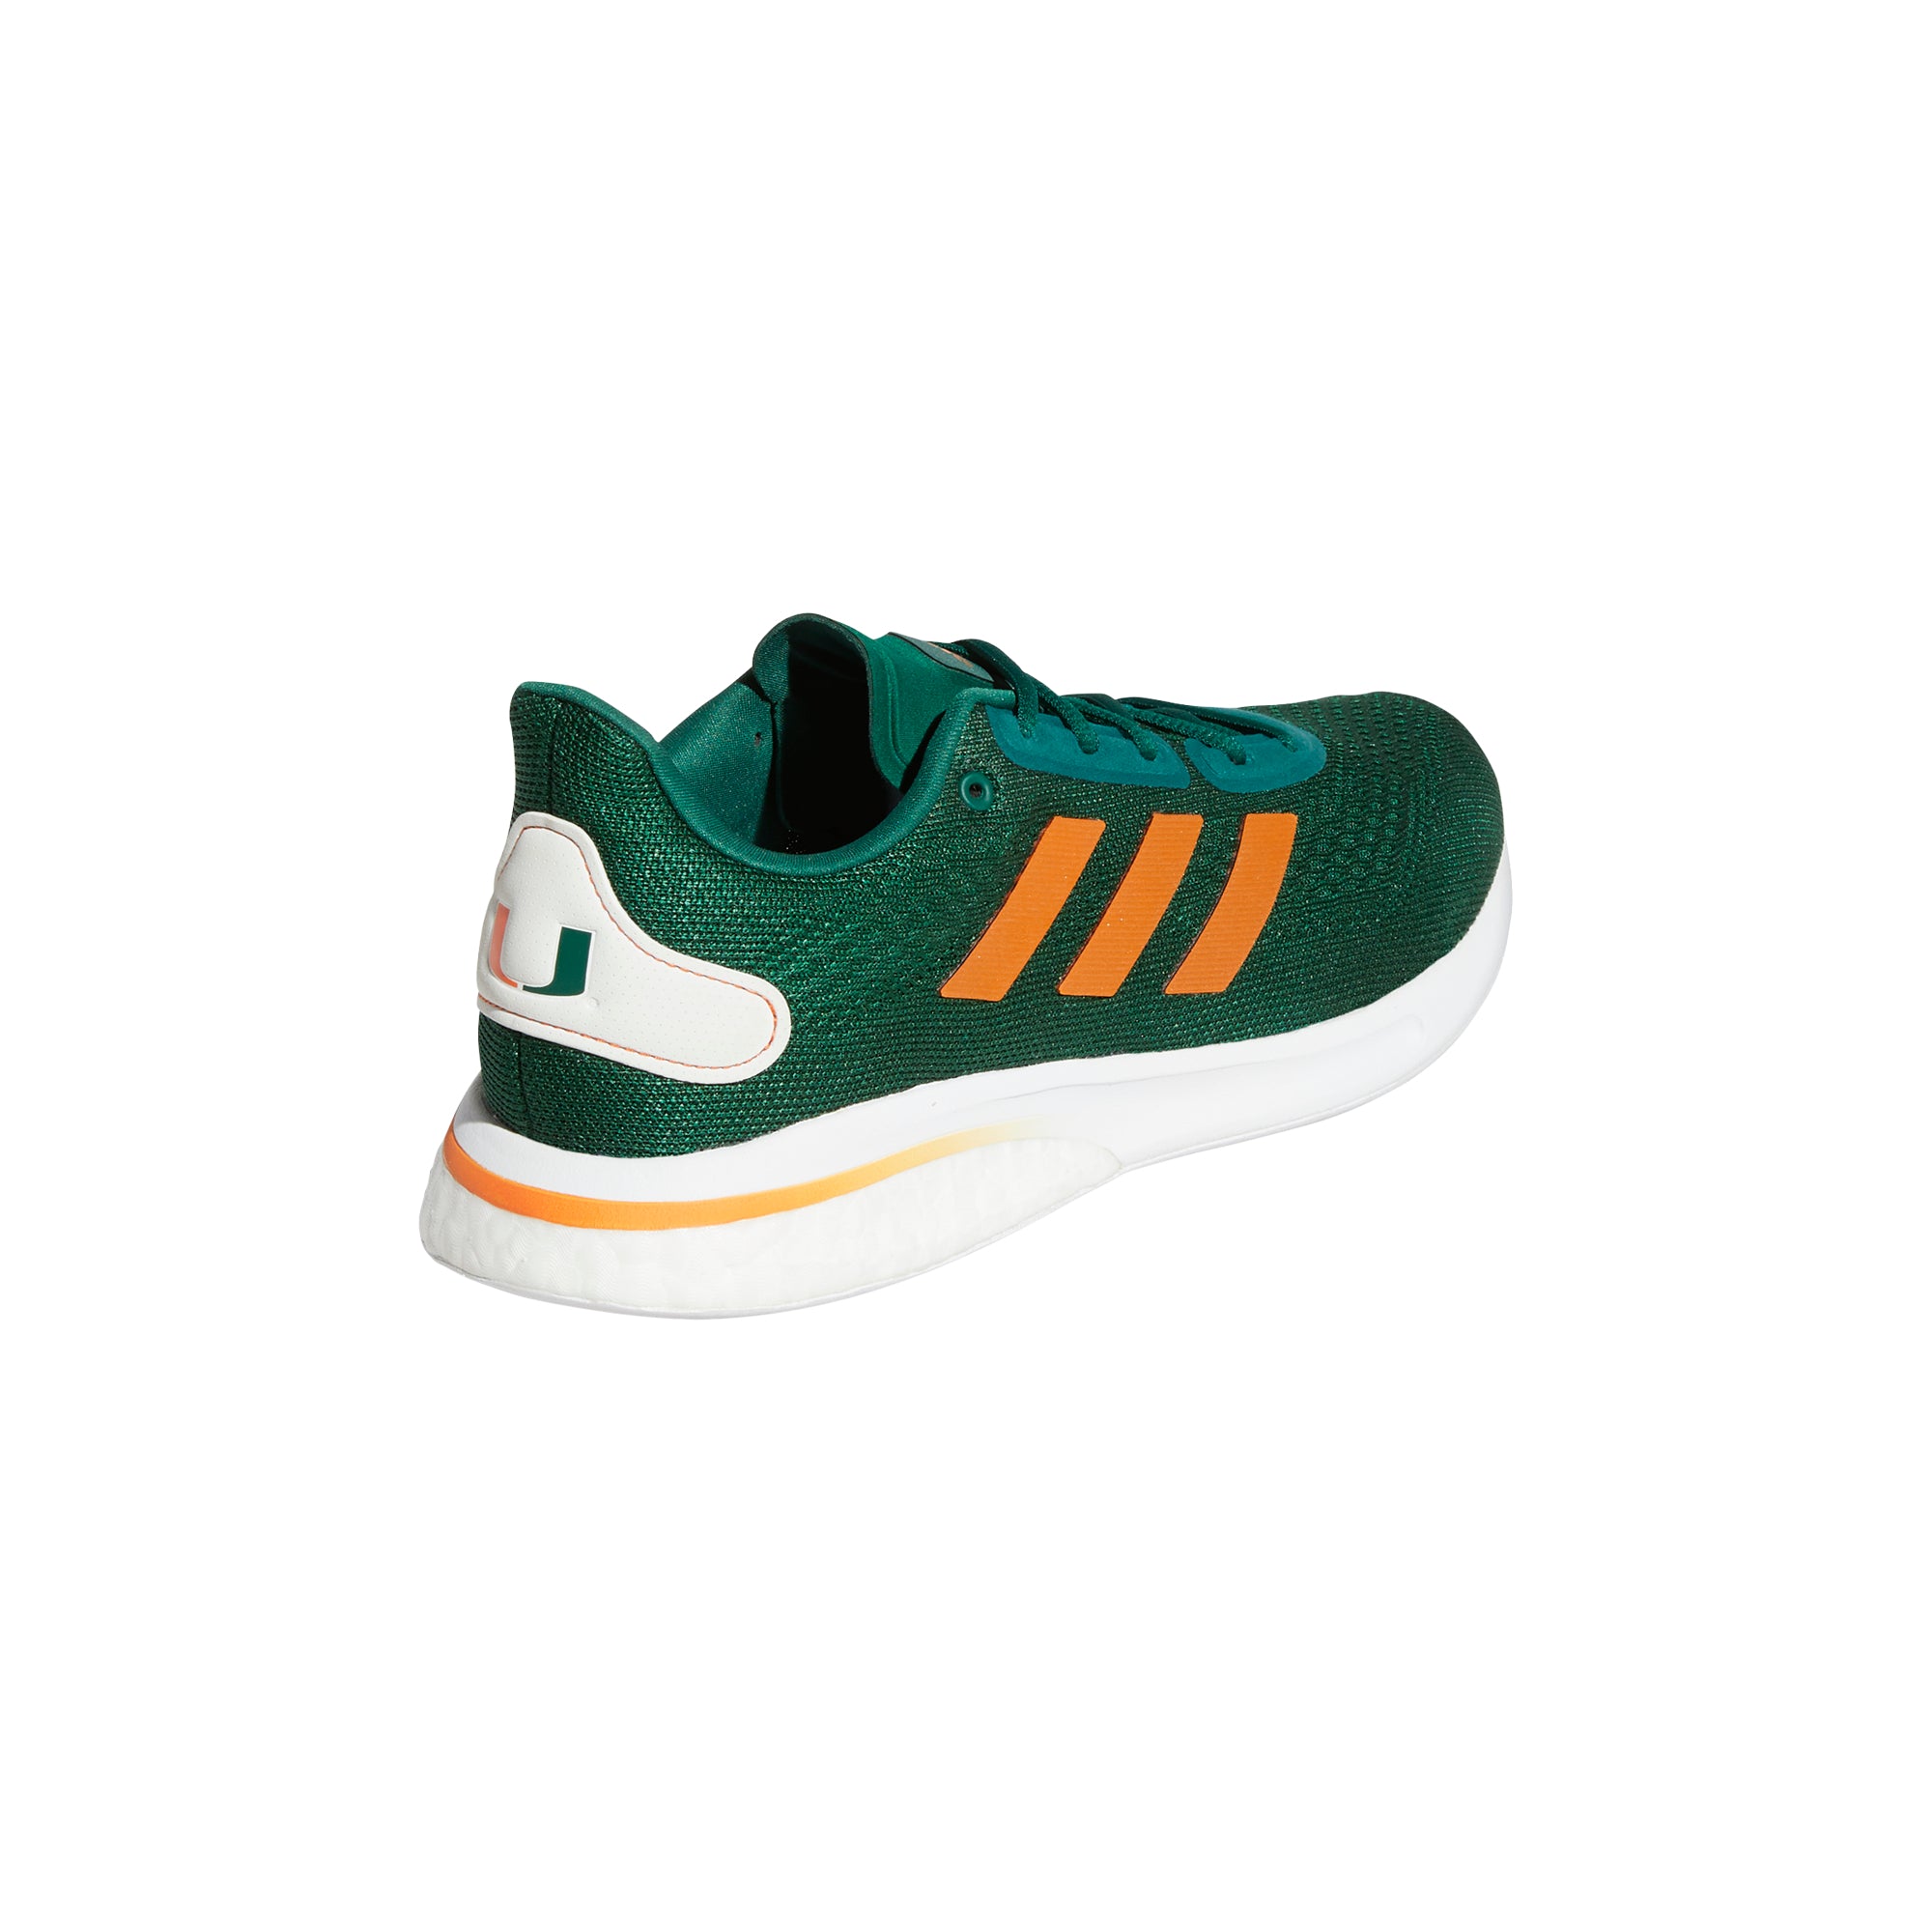 The Miami Hurricanes Have More Exclusive adidas Sneakers